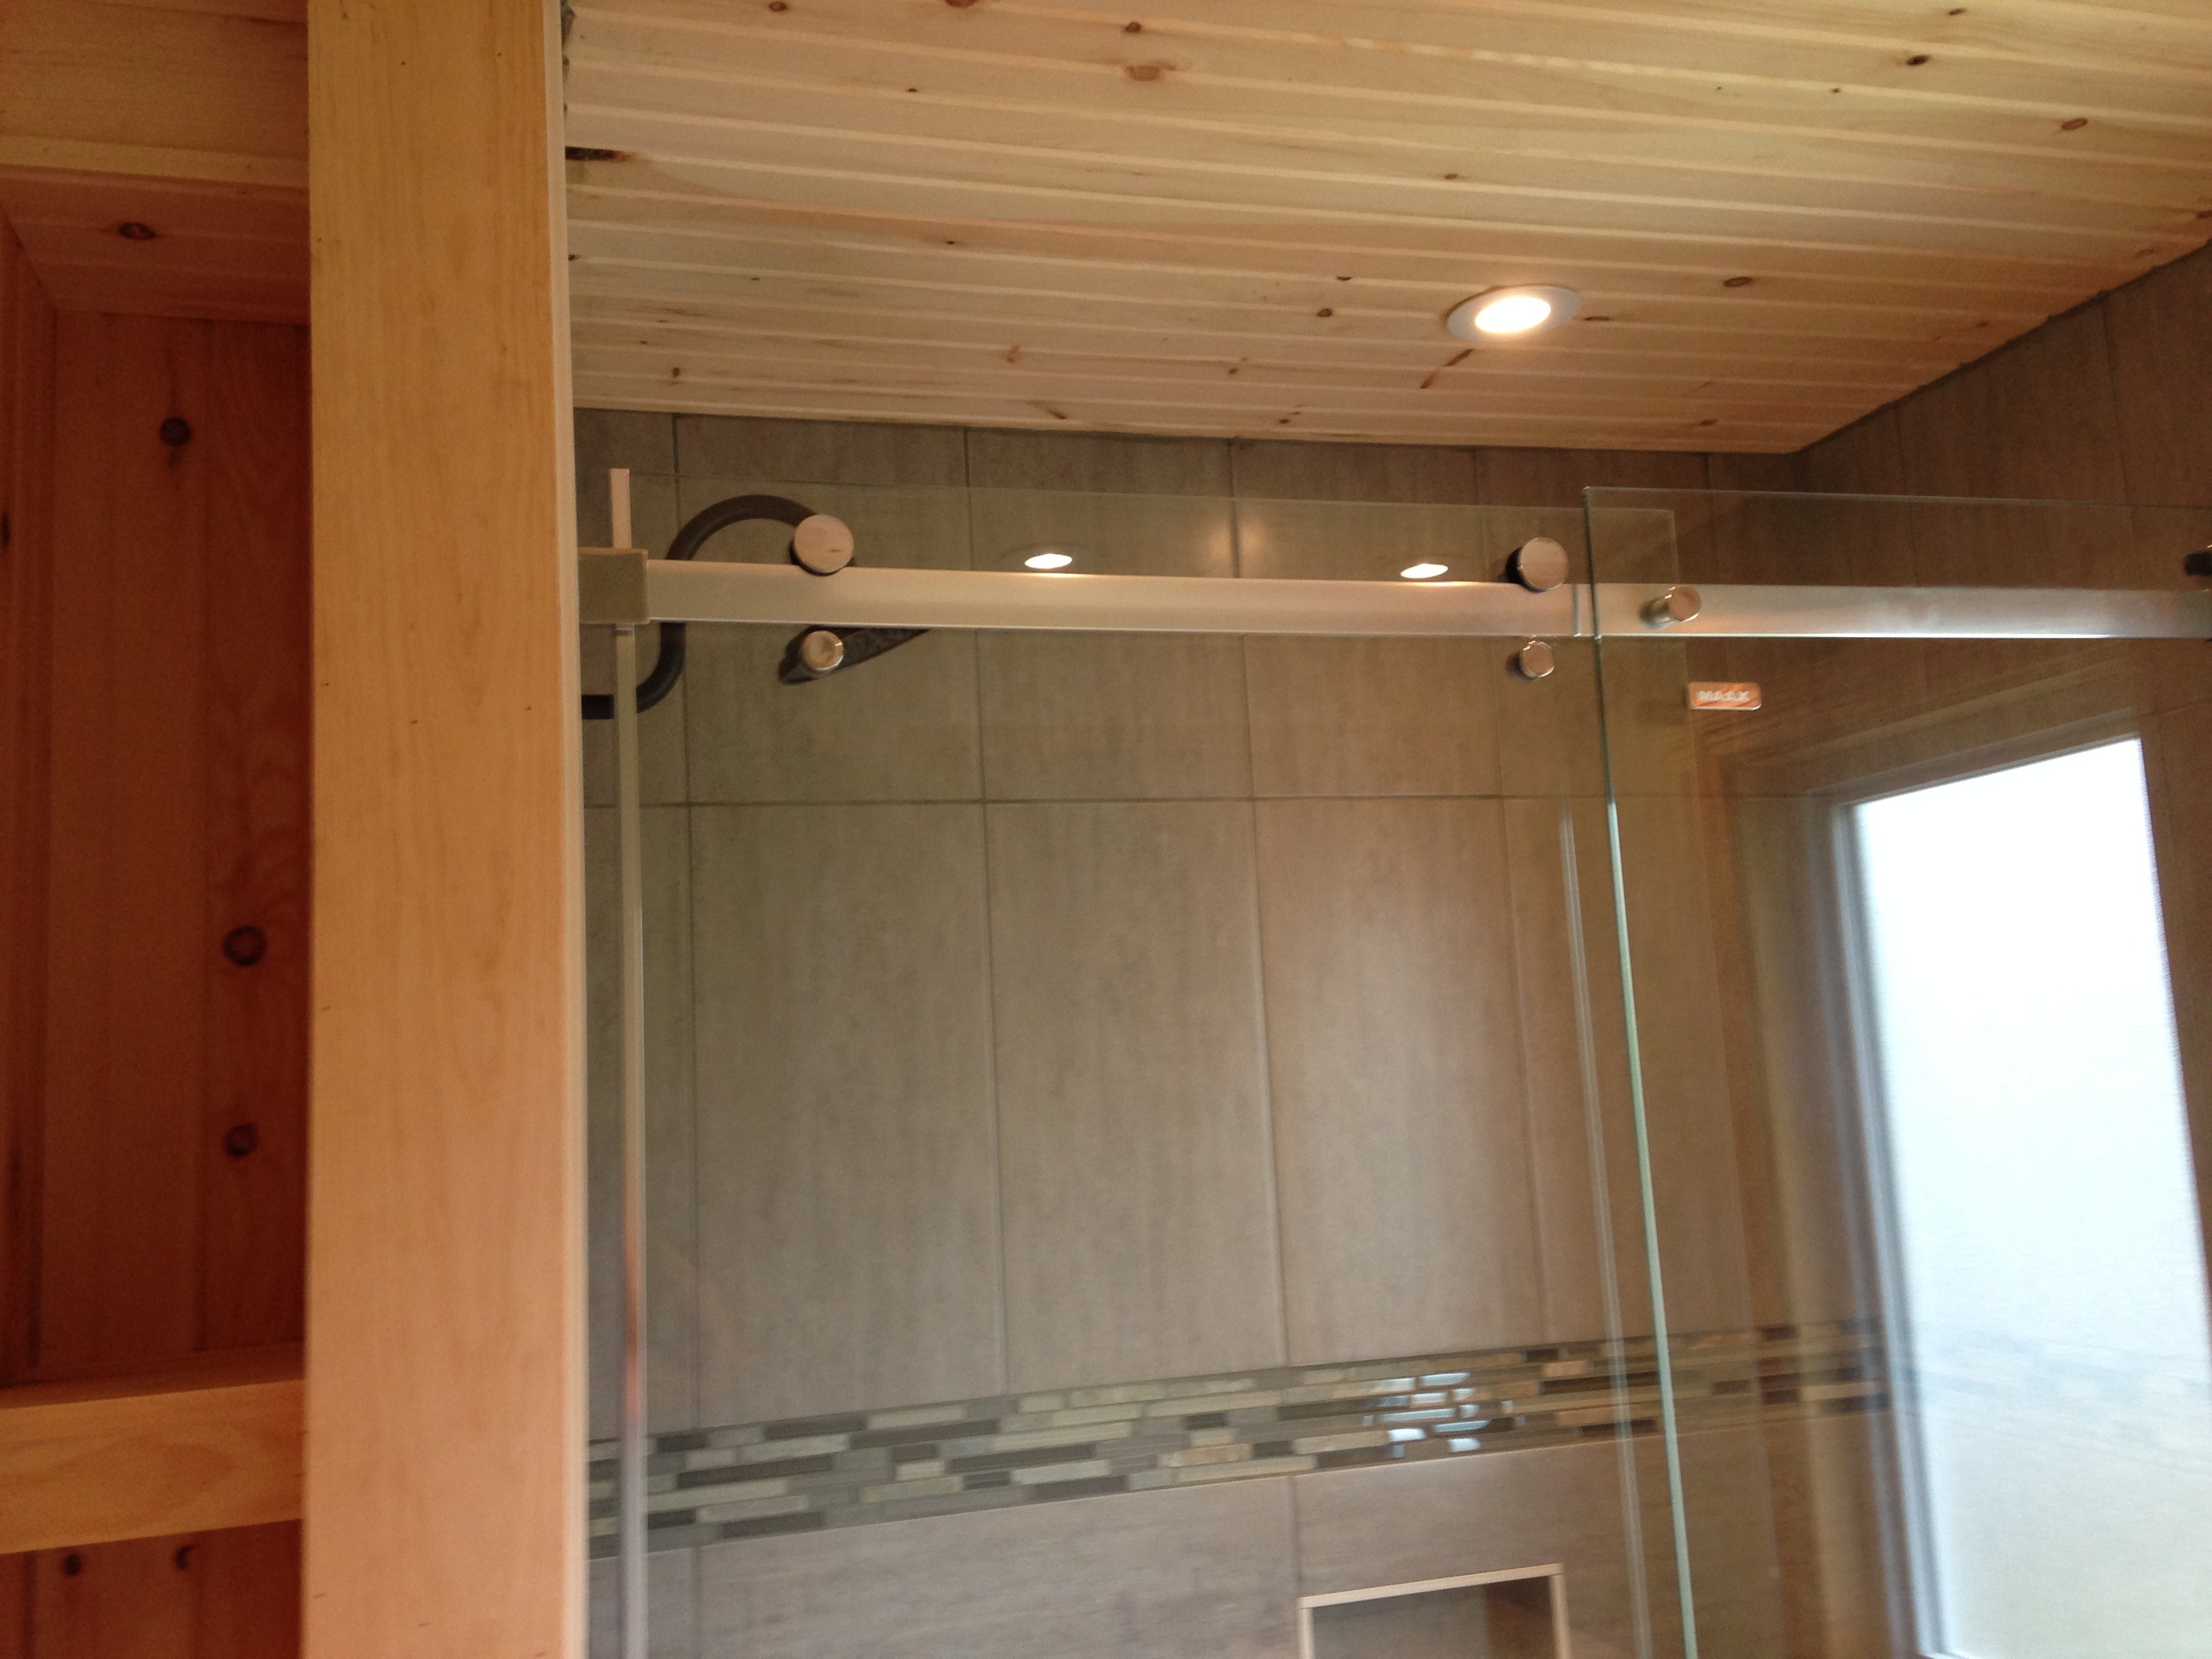 Pine ceiling and storage shelves